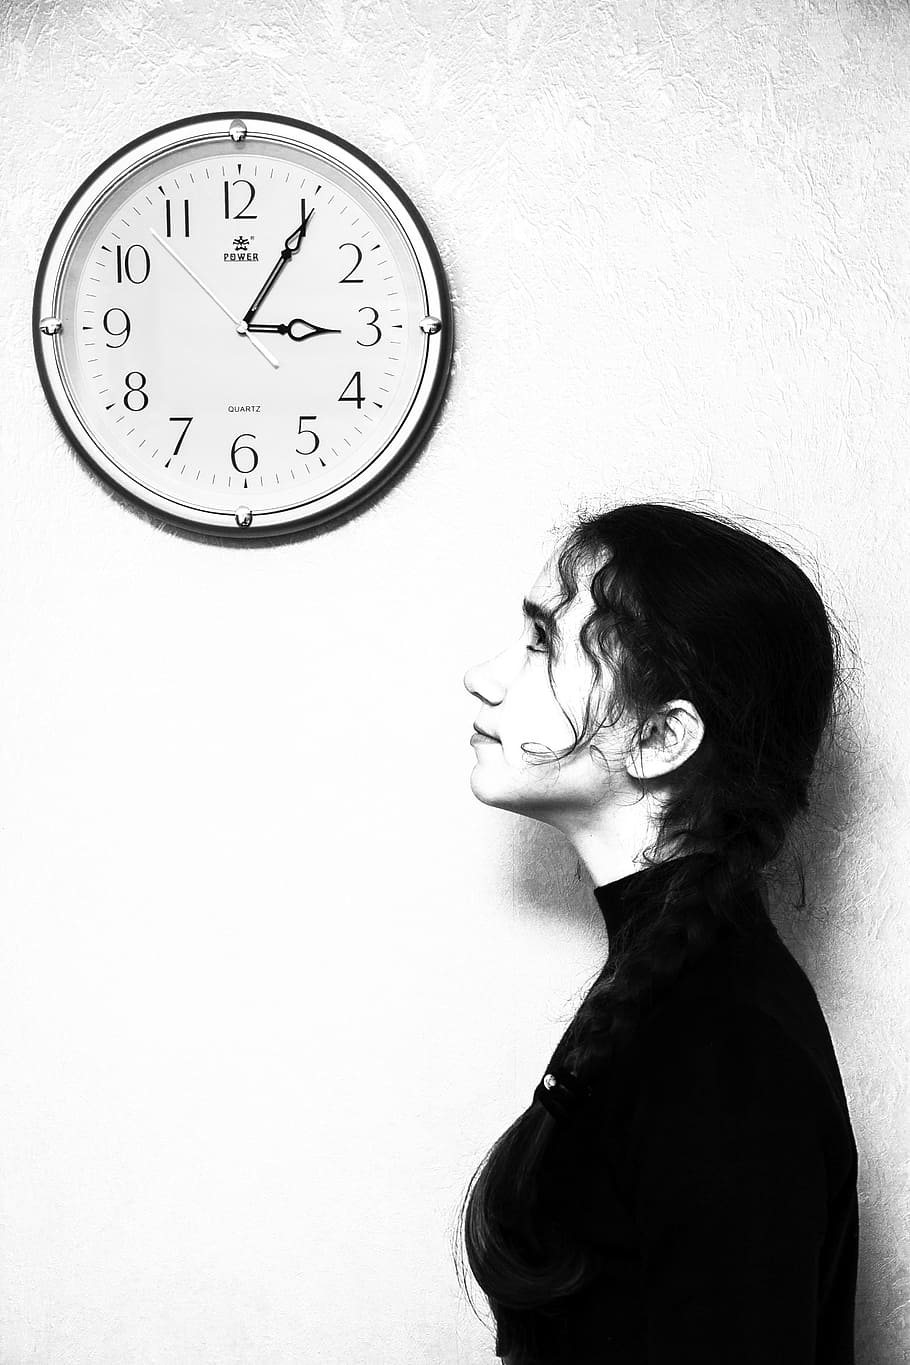 woman, standing, looking, wall clock, girl, clock, person, time, thinking, women